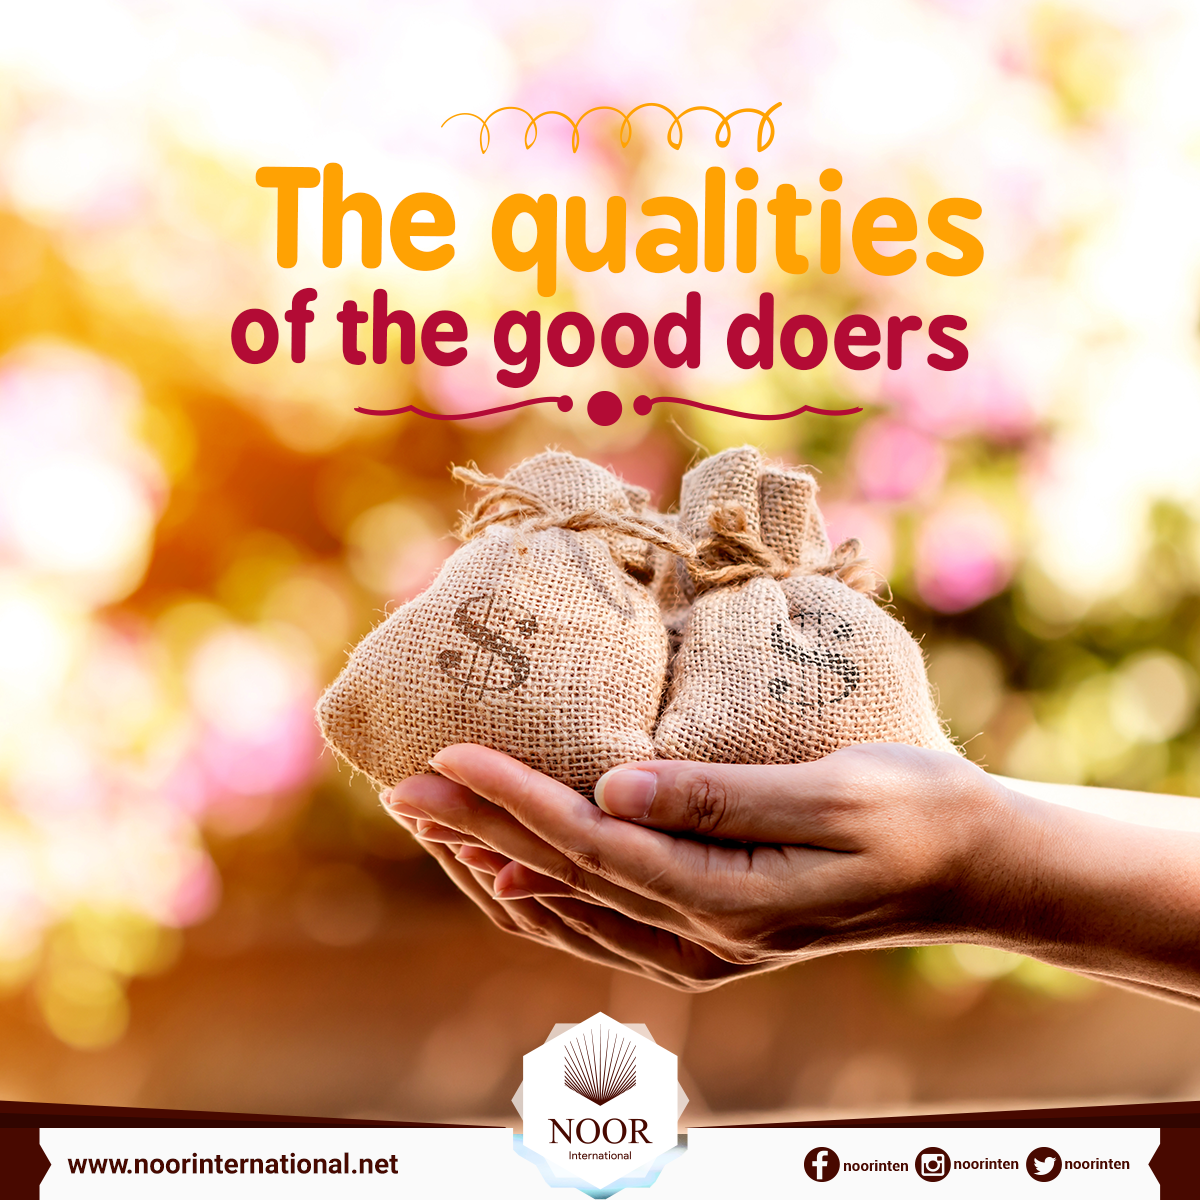 The qualities of the good doers